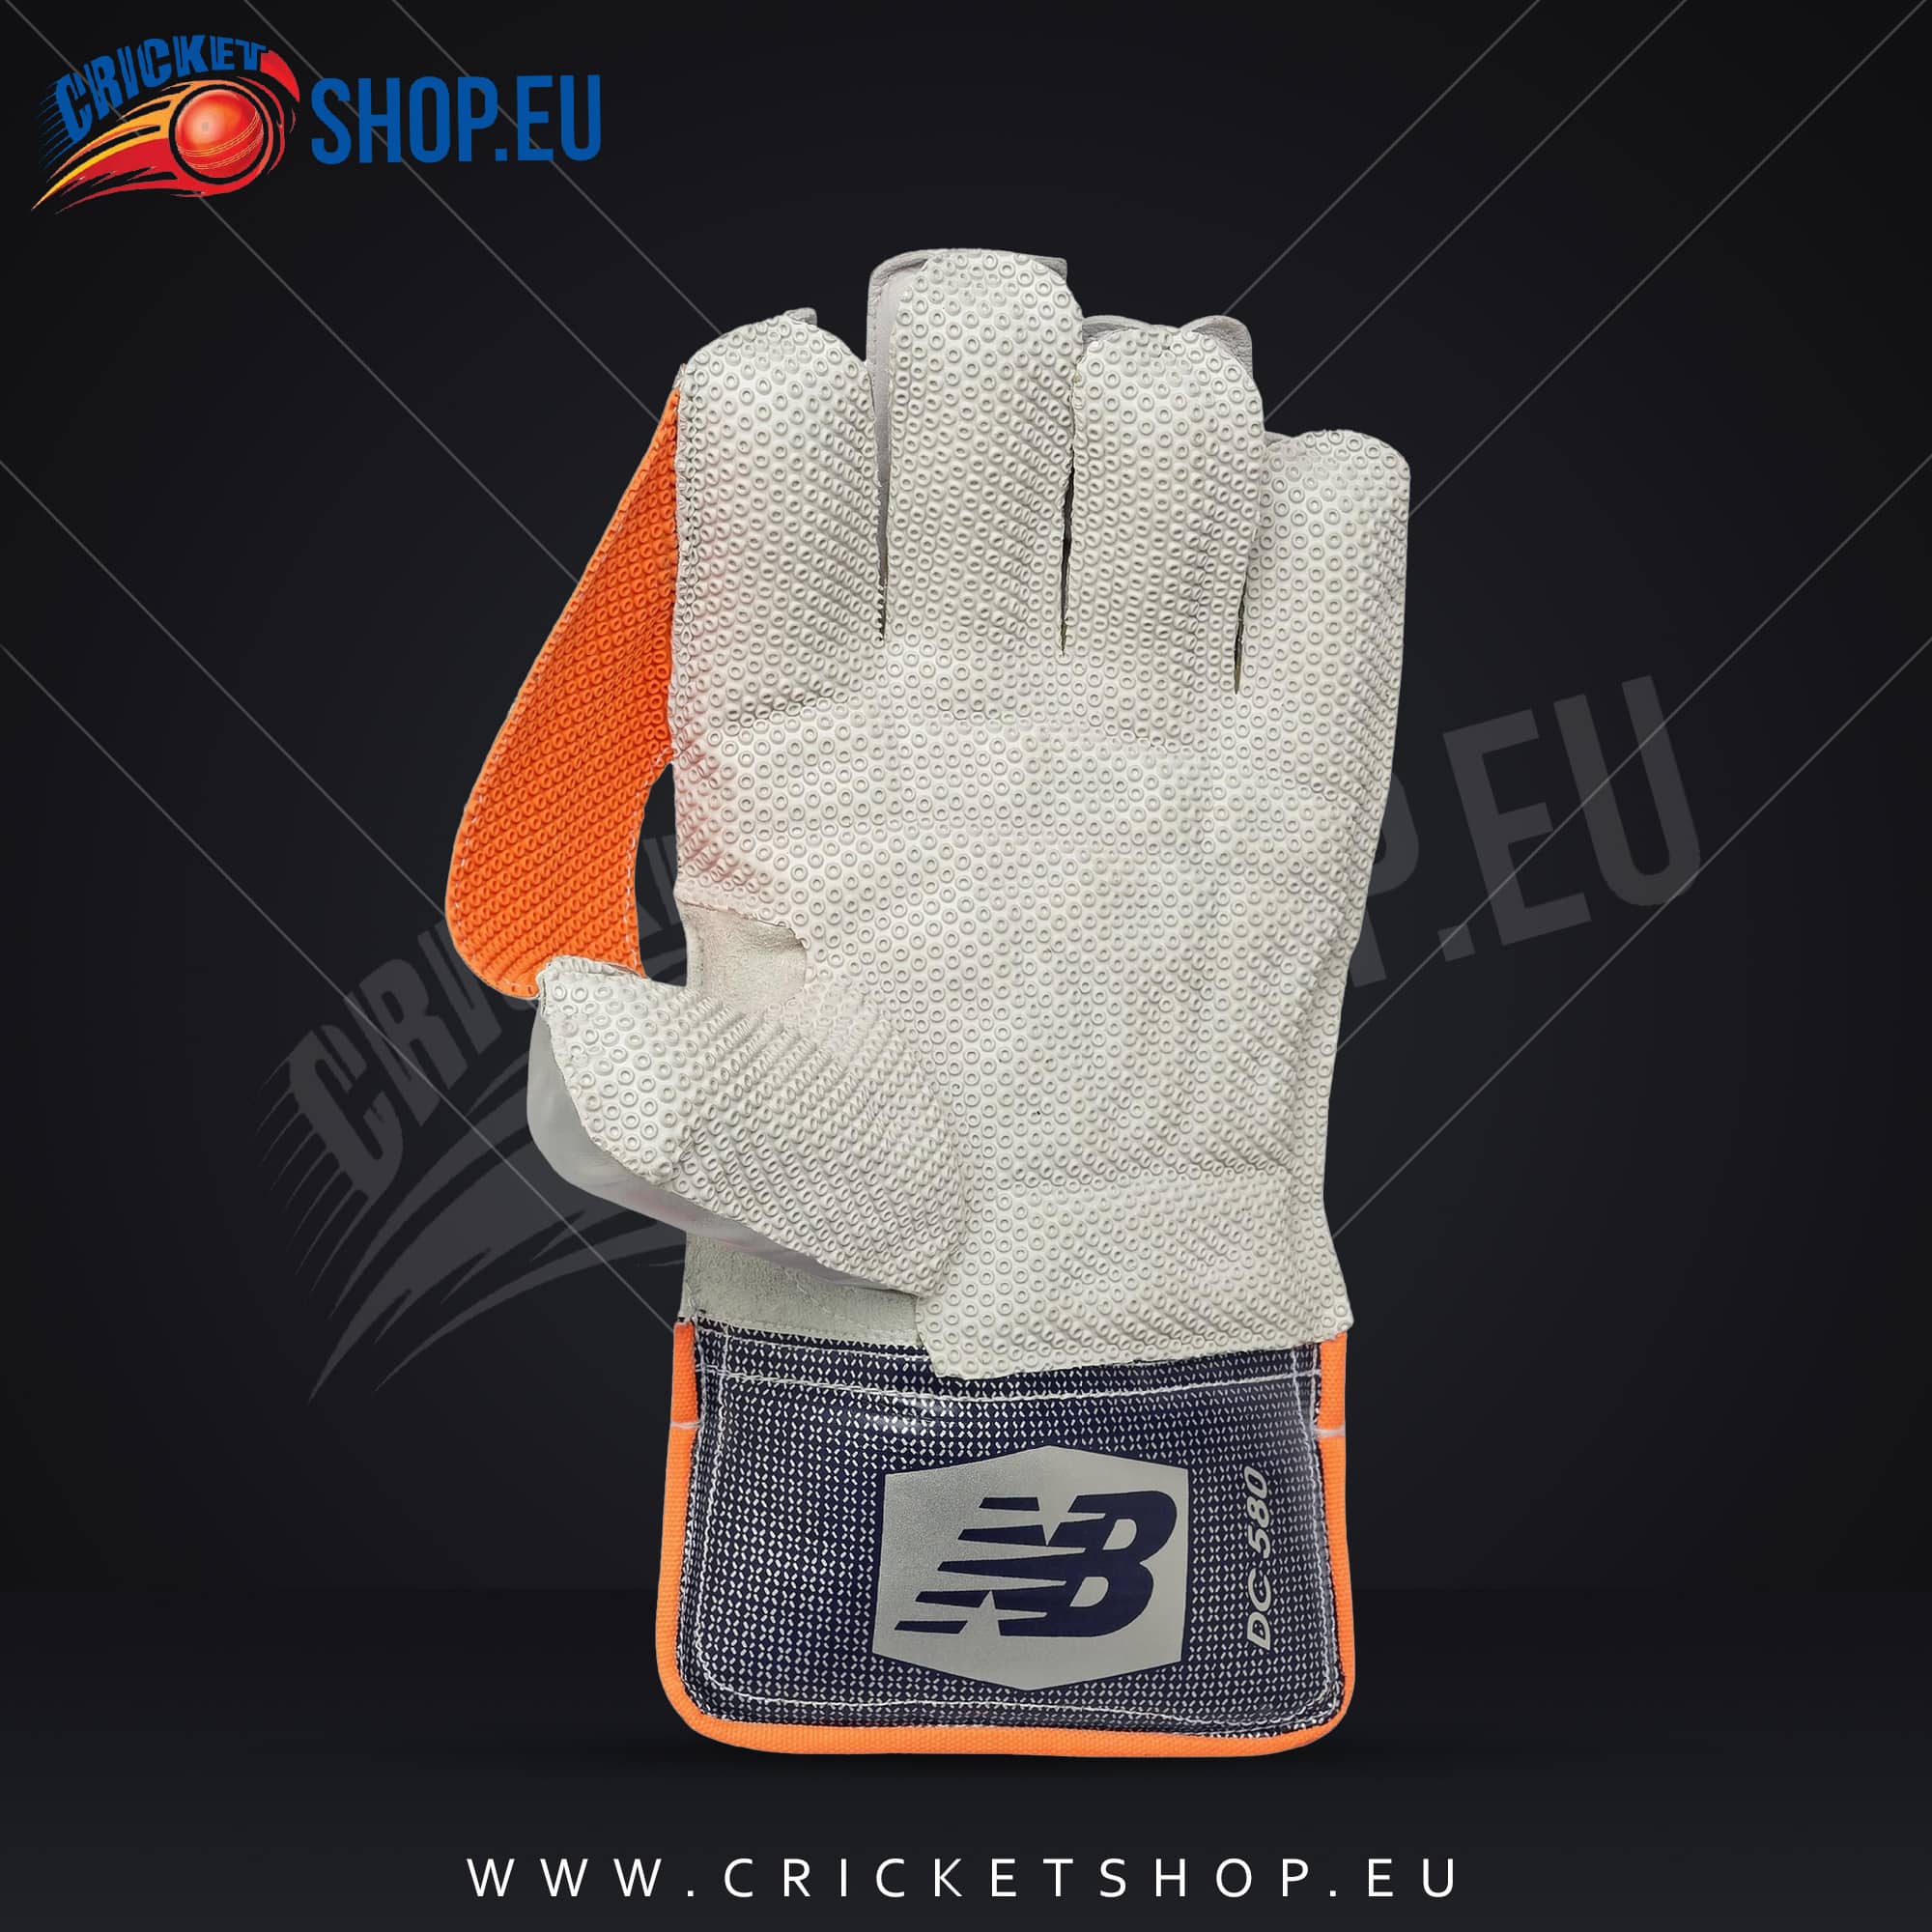 2023 New Balance DC 580 Wicket Keeping Gloves